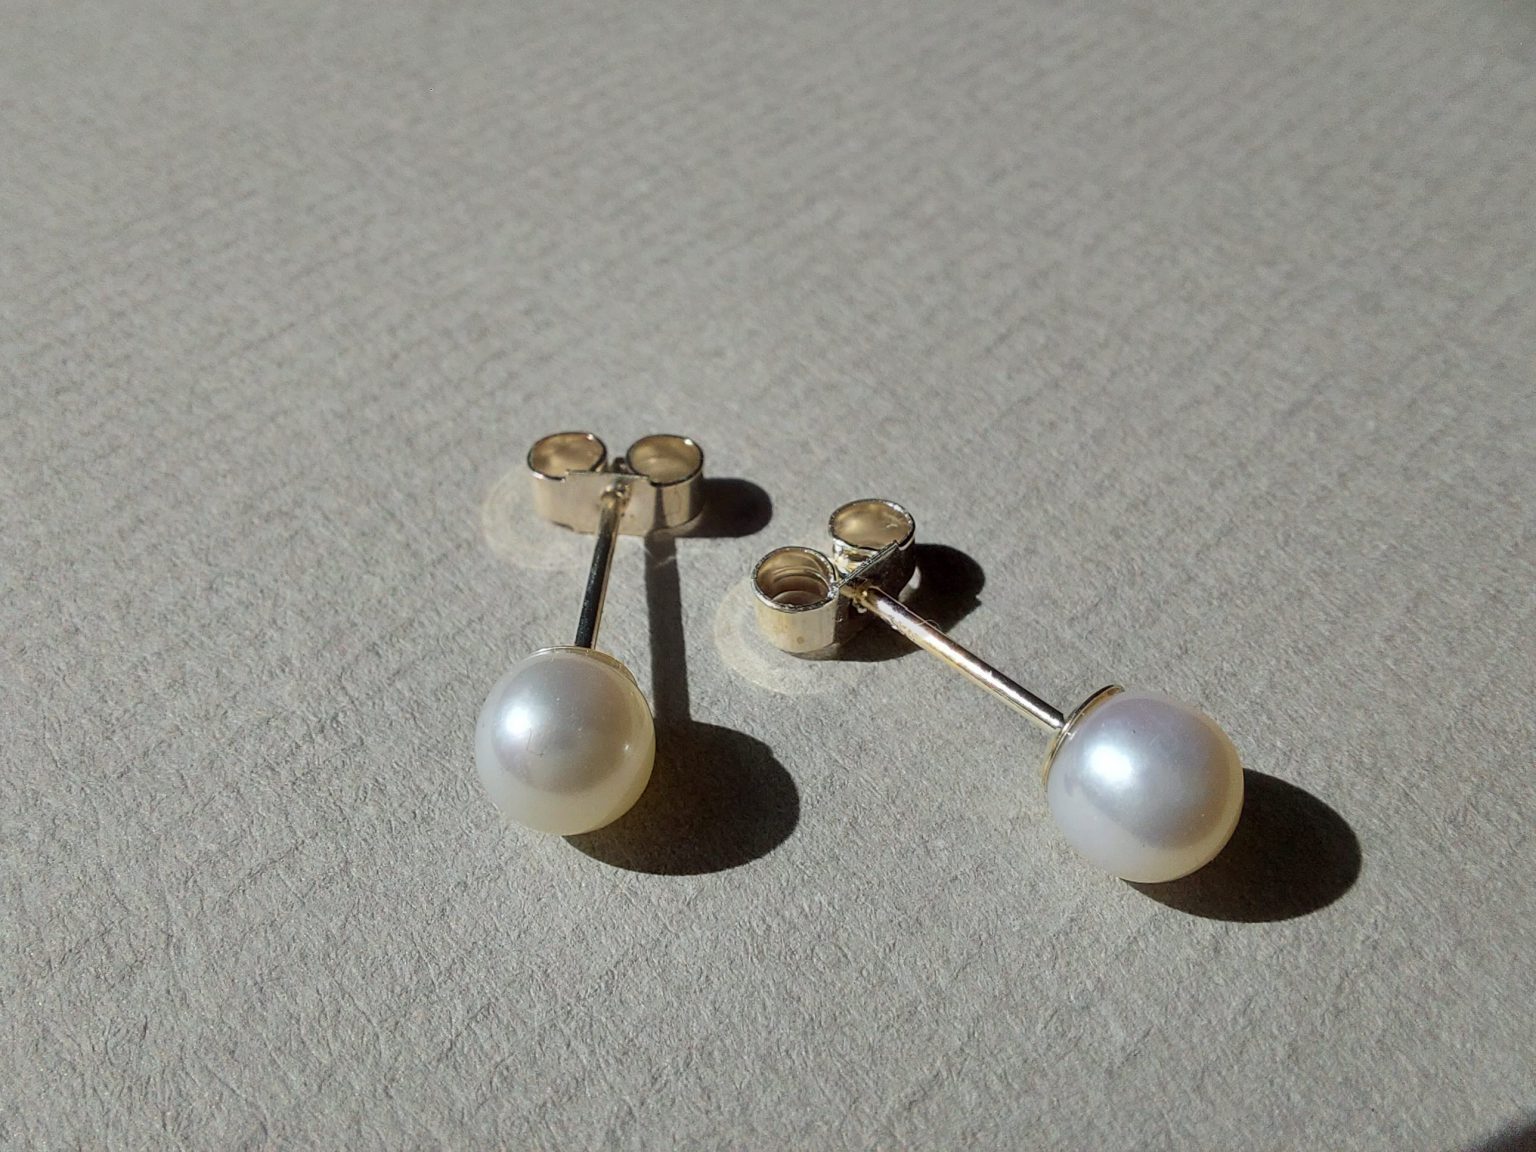 5 Minute Makes: Cultured Freshwater Pearl Studs - The Bench